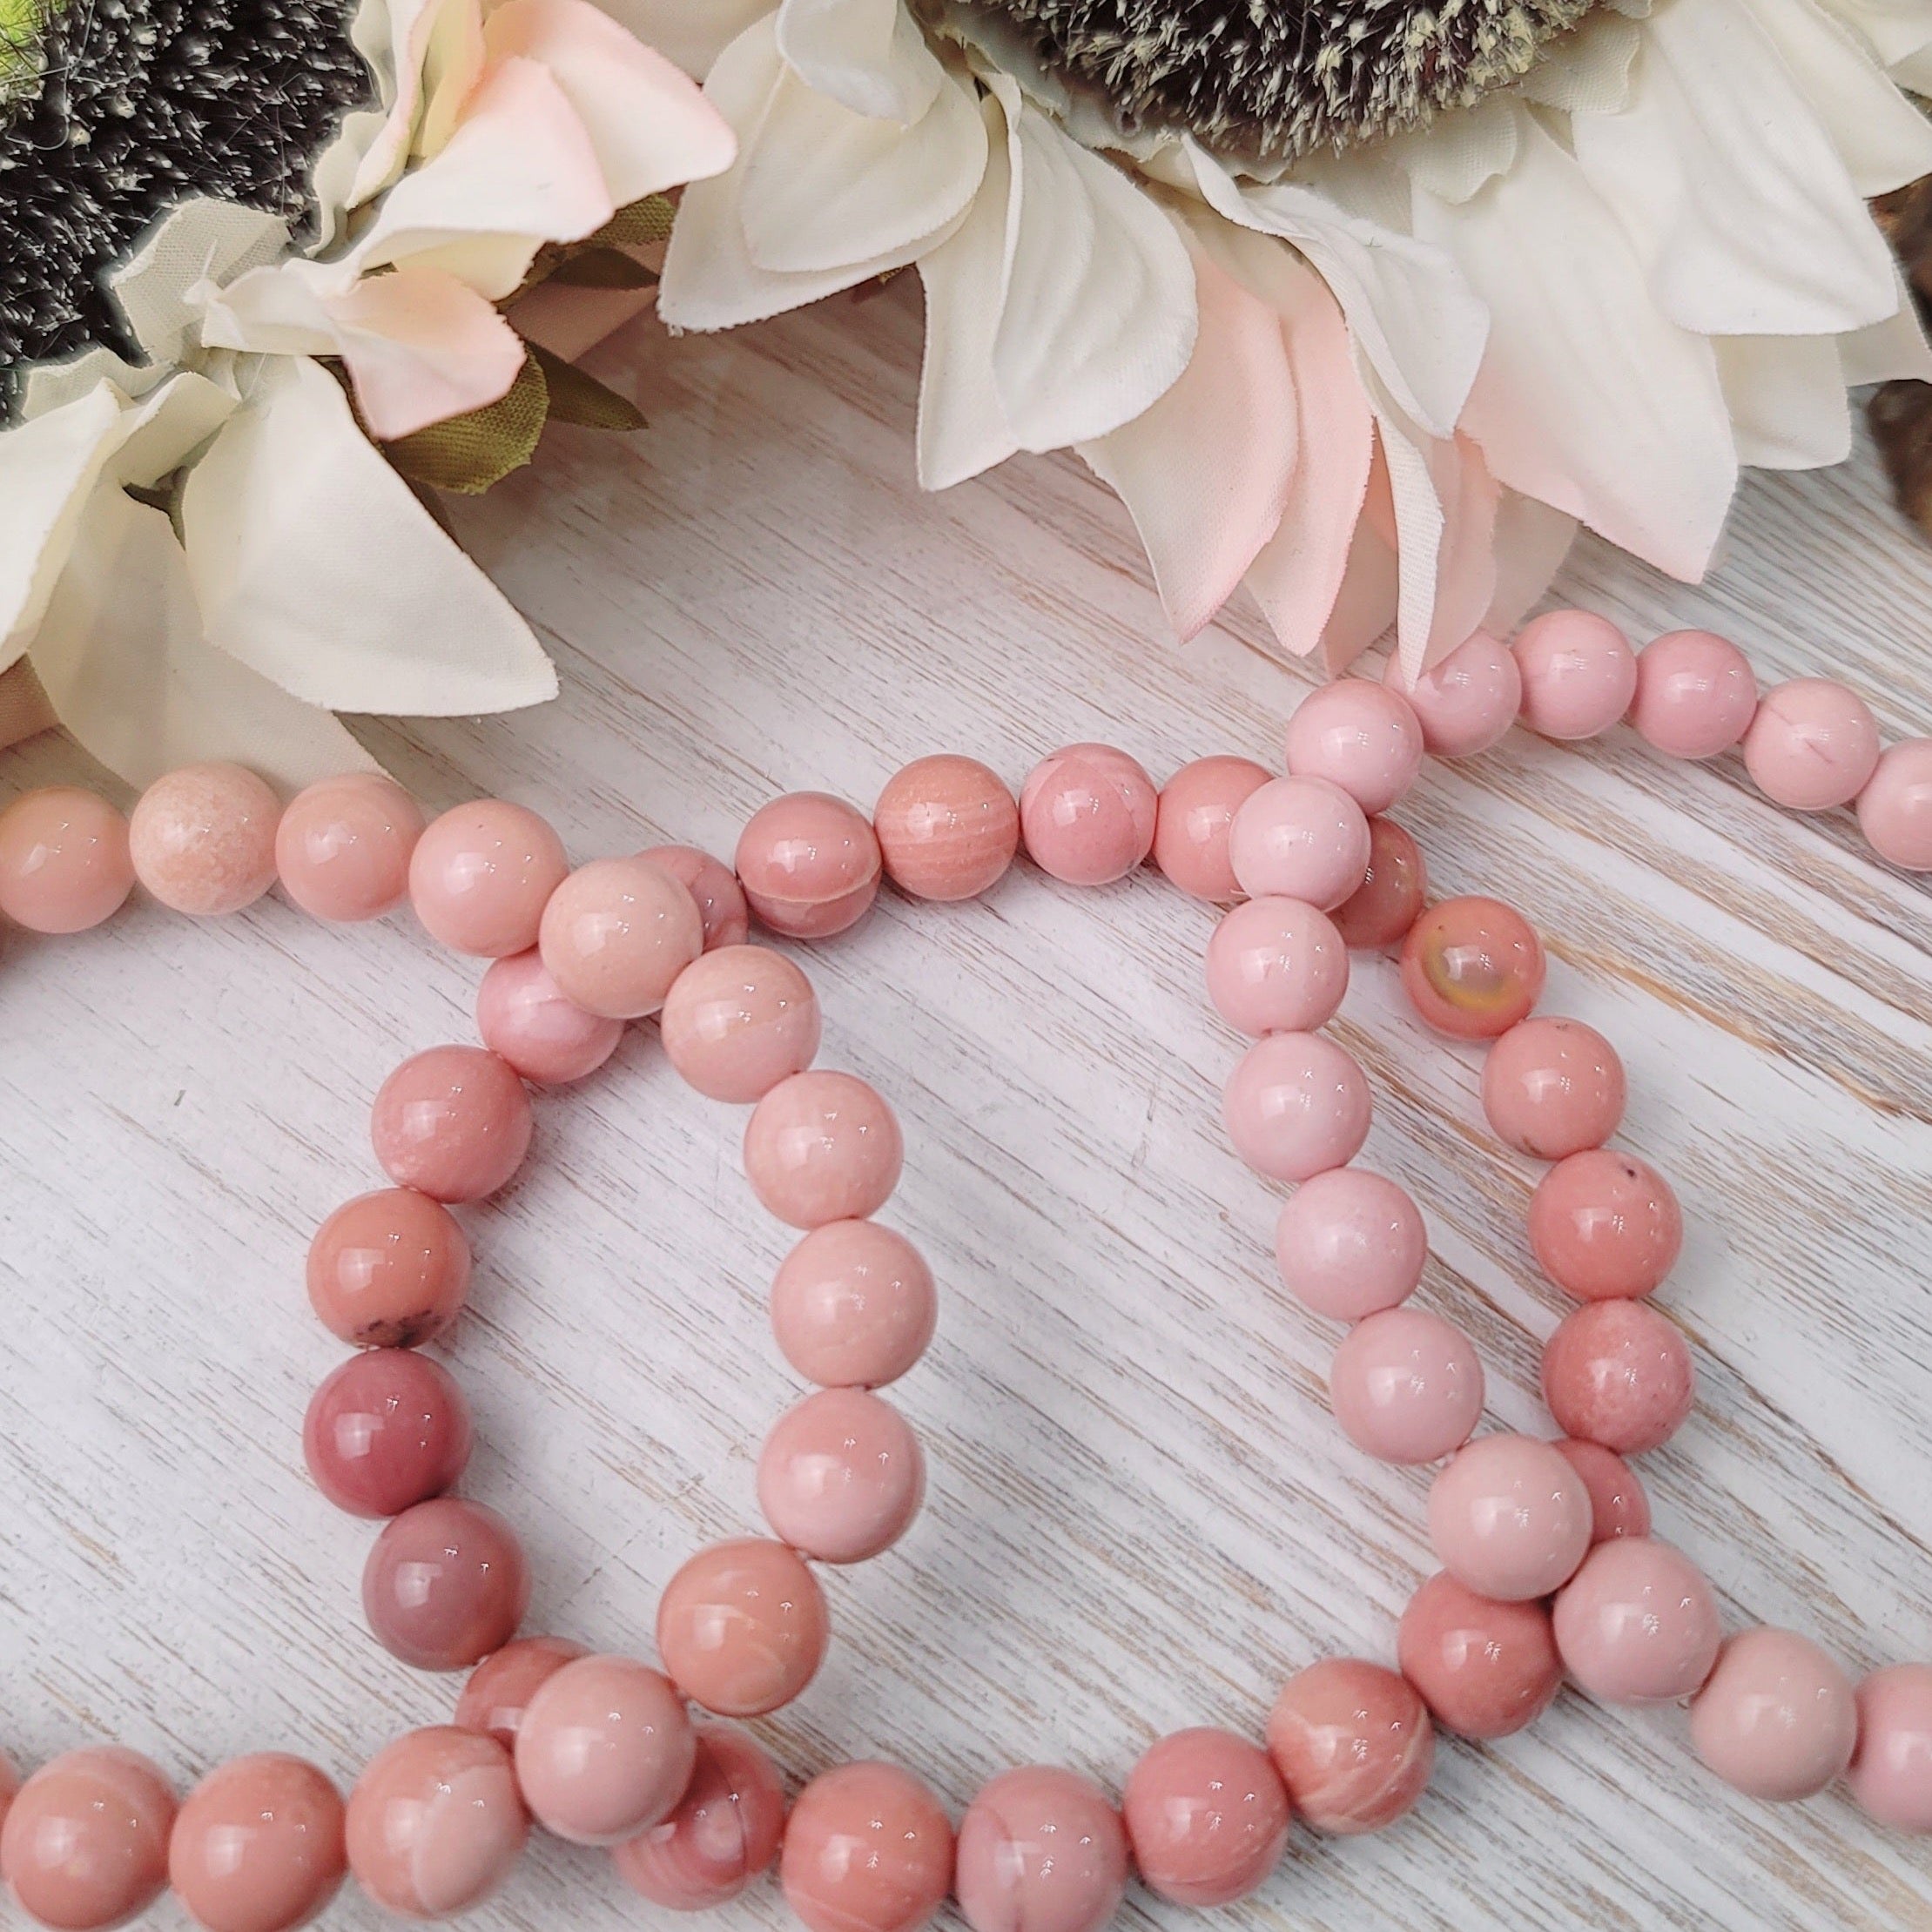 Alashan Pink Agate Bracelet (High Quality) for Chasing your Dreams, Enhanced Memory, Protection & Stress Relief